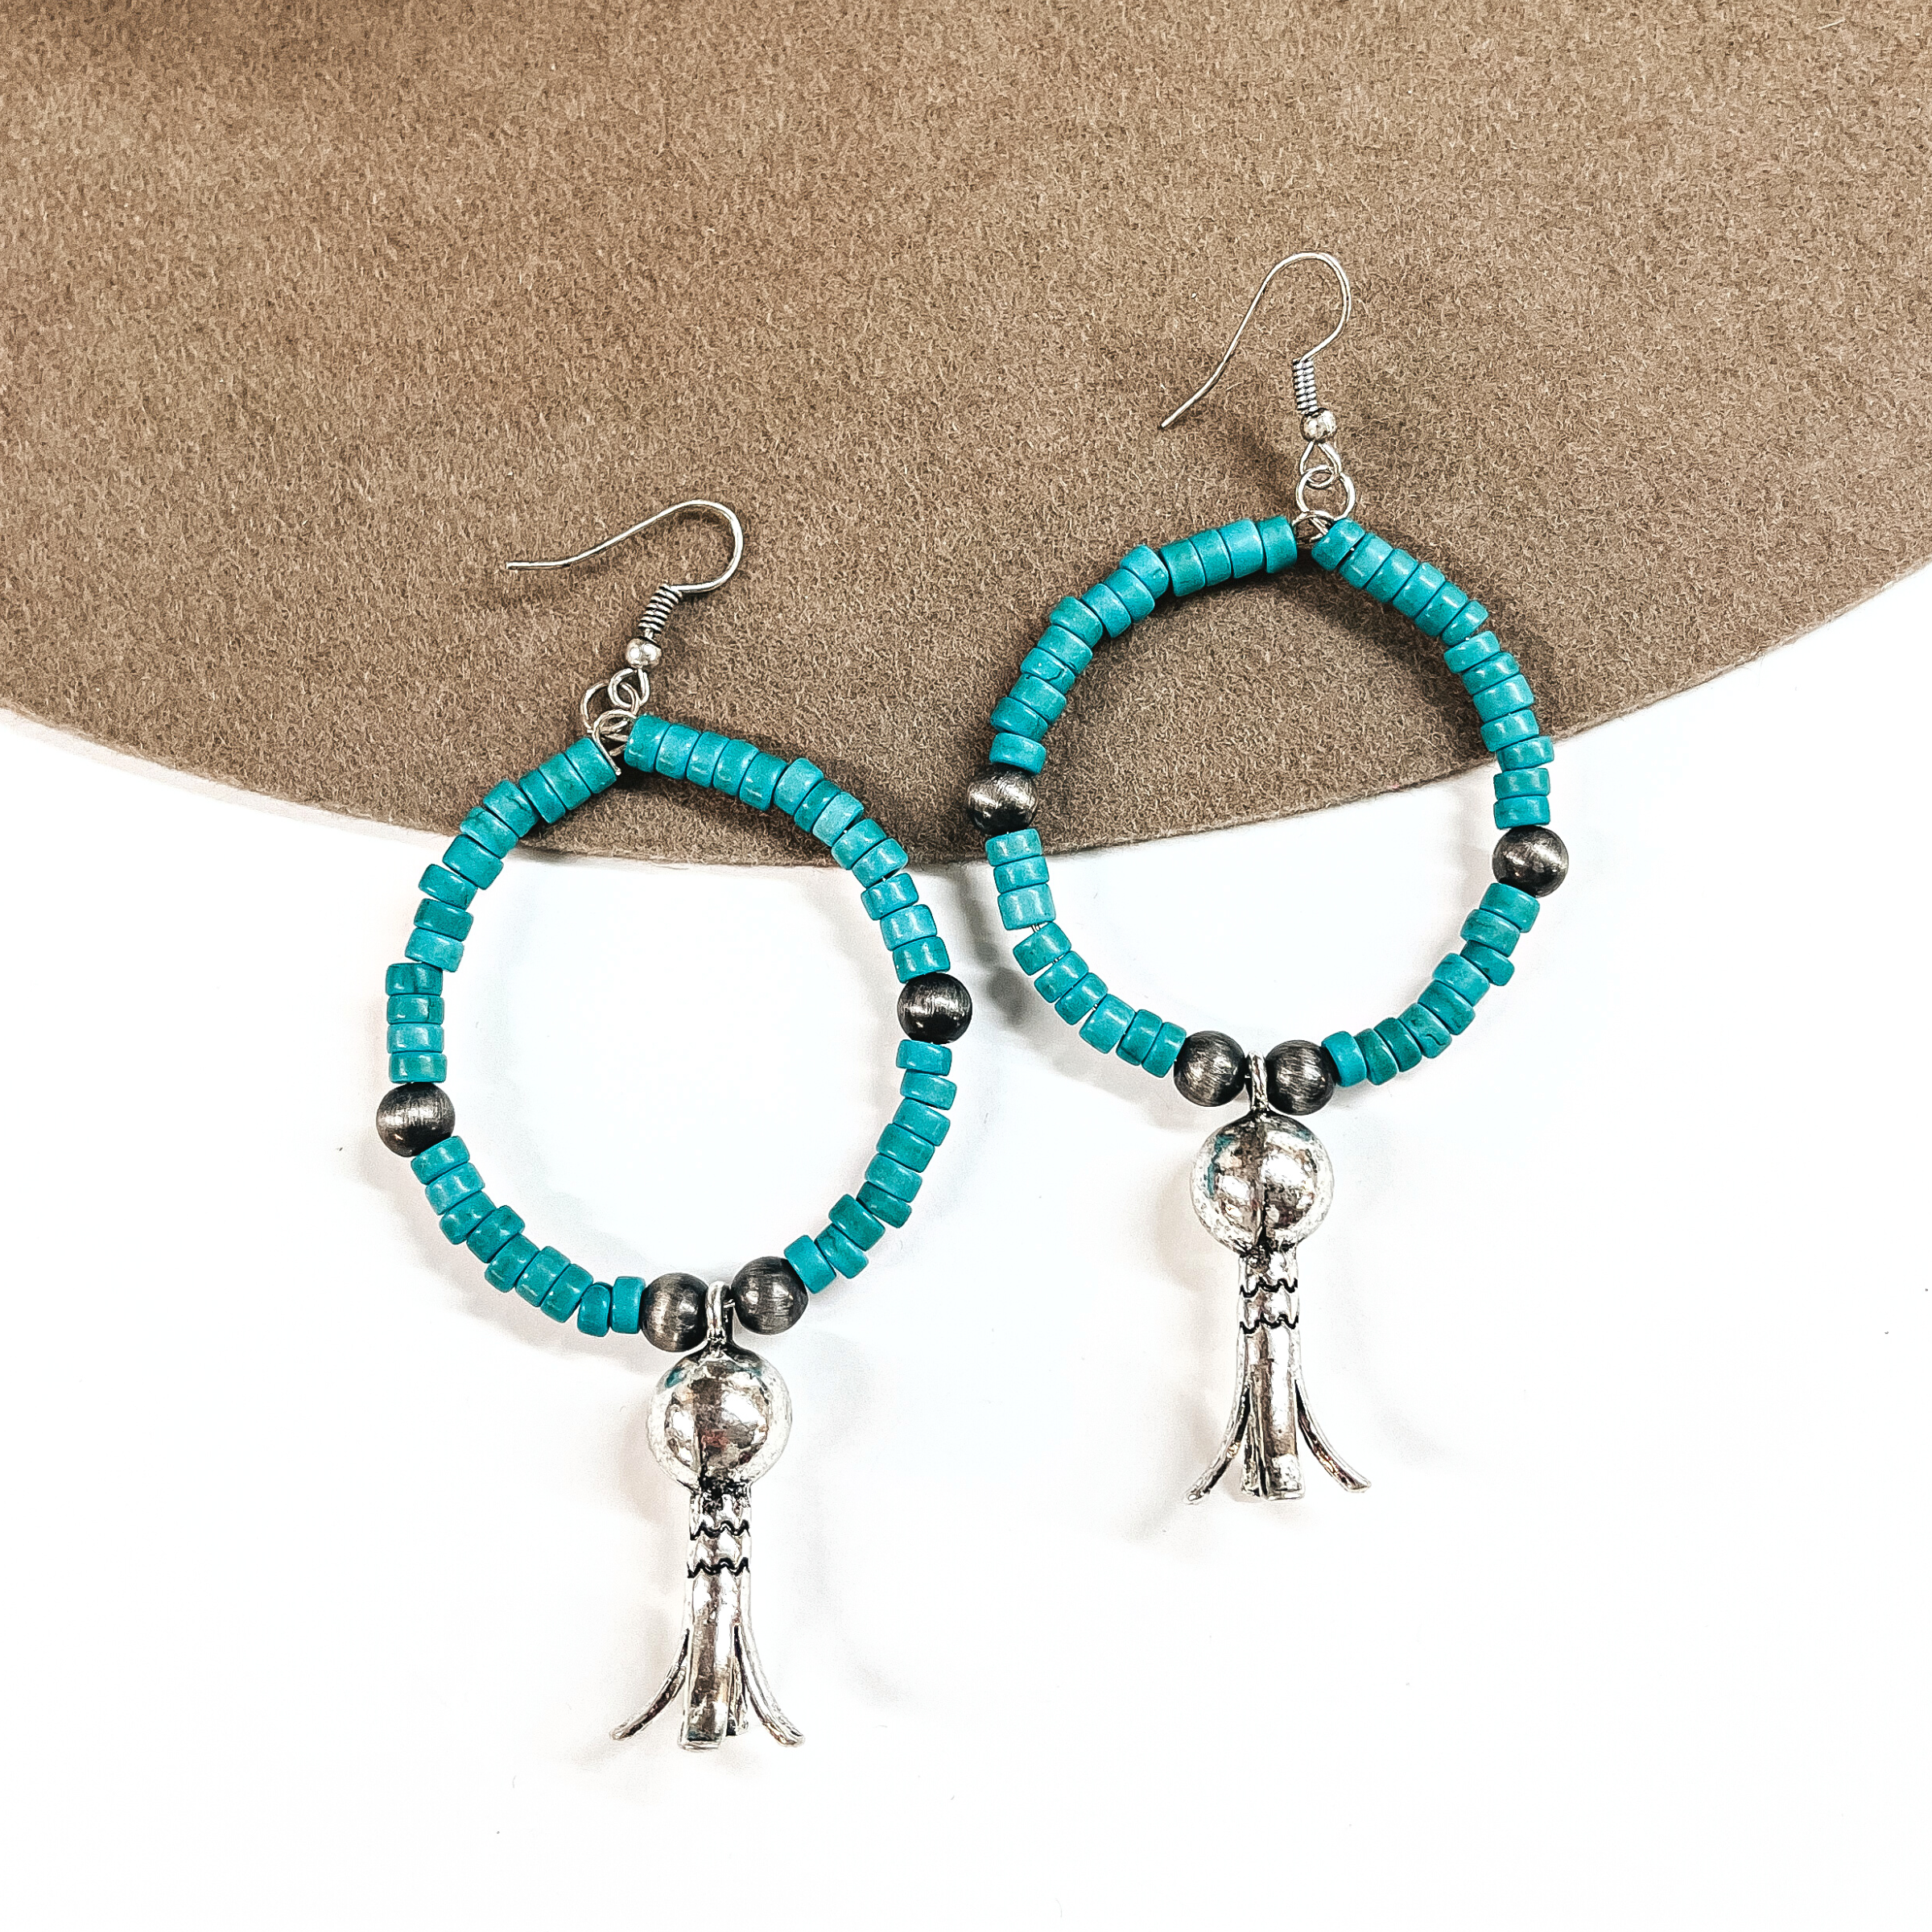 These are turquoise beaded hoop earrings with silver bead spacers, and a silver squash  blossom drop. These earrings are taken on a brown felt hat brim and on a  white background.